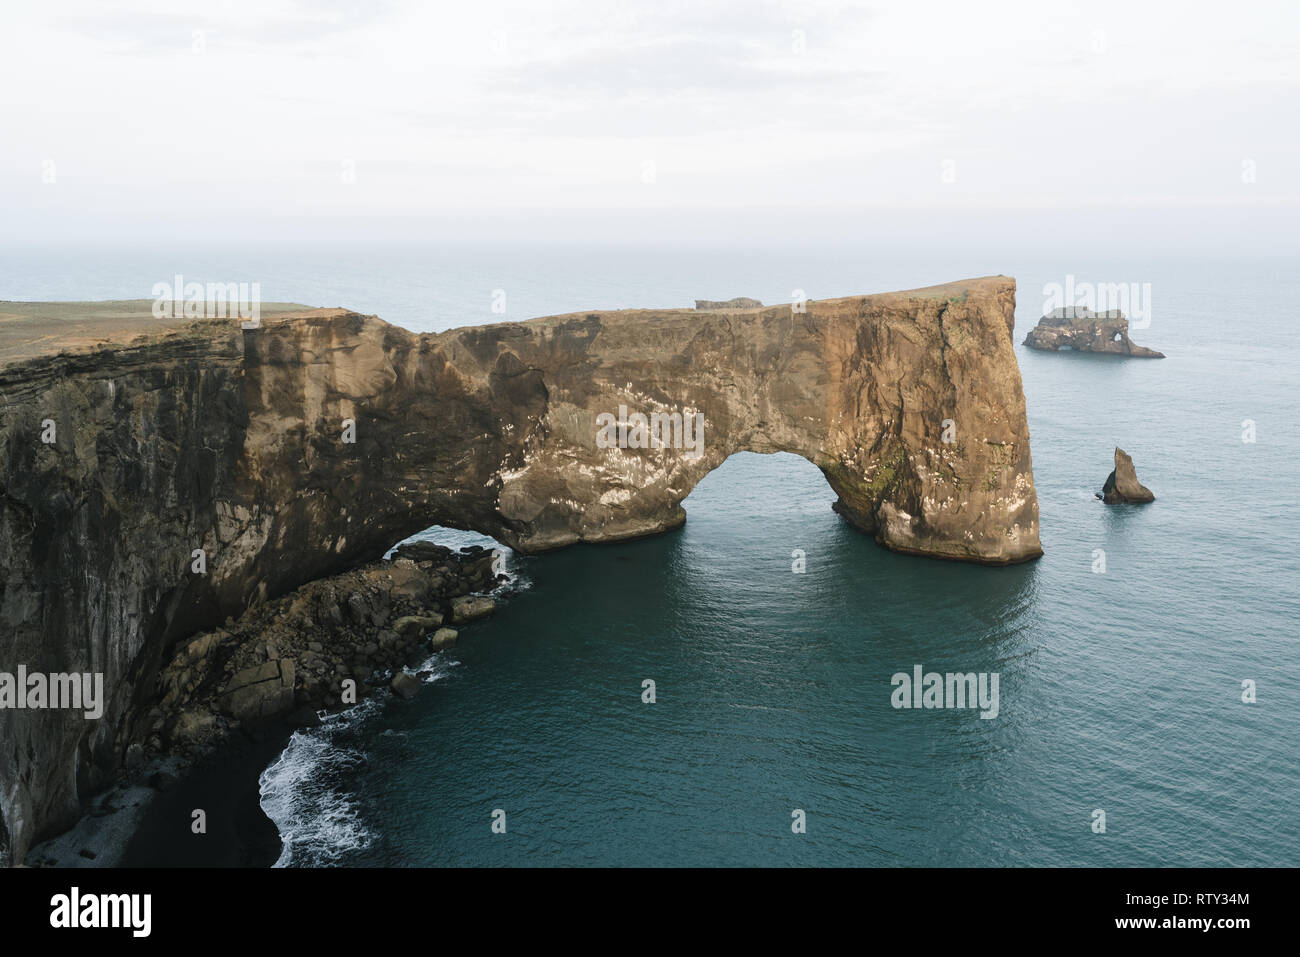 Peninsula Dyrholaey, southern coast of Iceland. Muffled landscape in discreet colors conveying loneliness and state of mind. Rock arch on the ocean. B Stock Photo